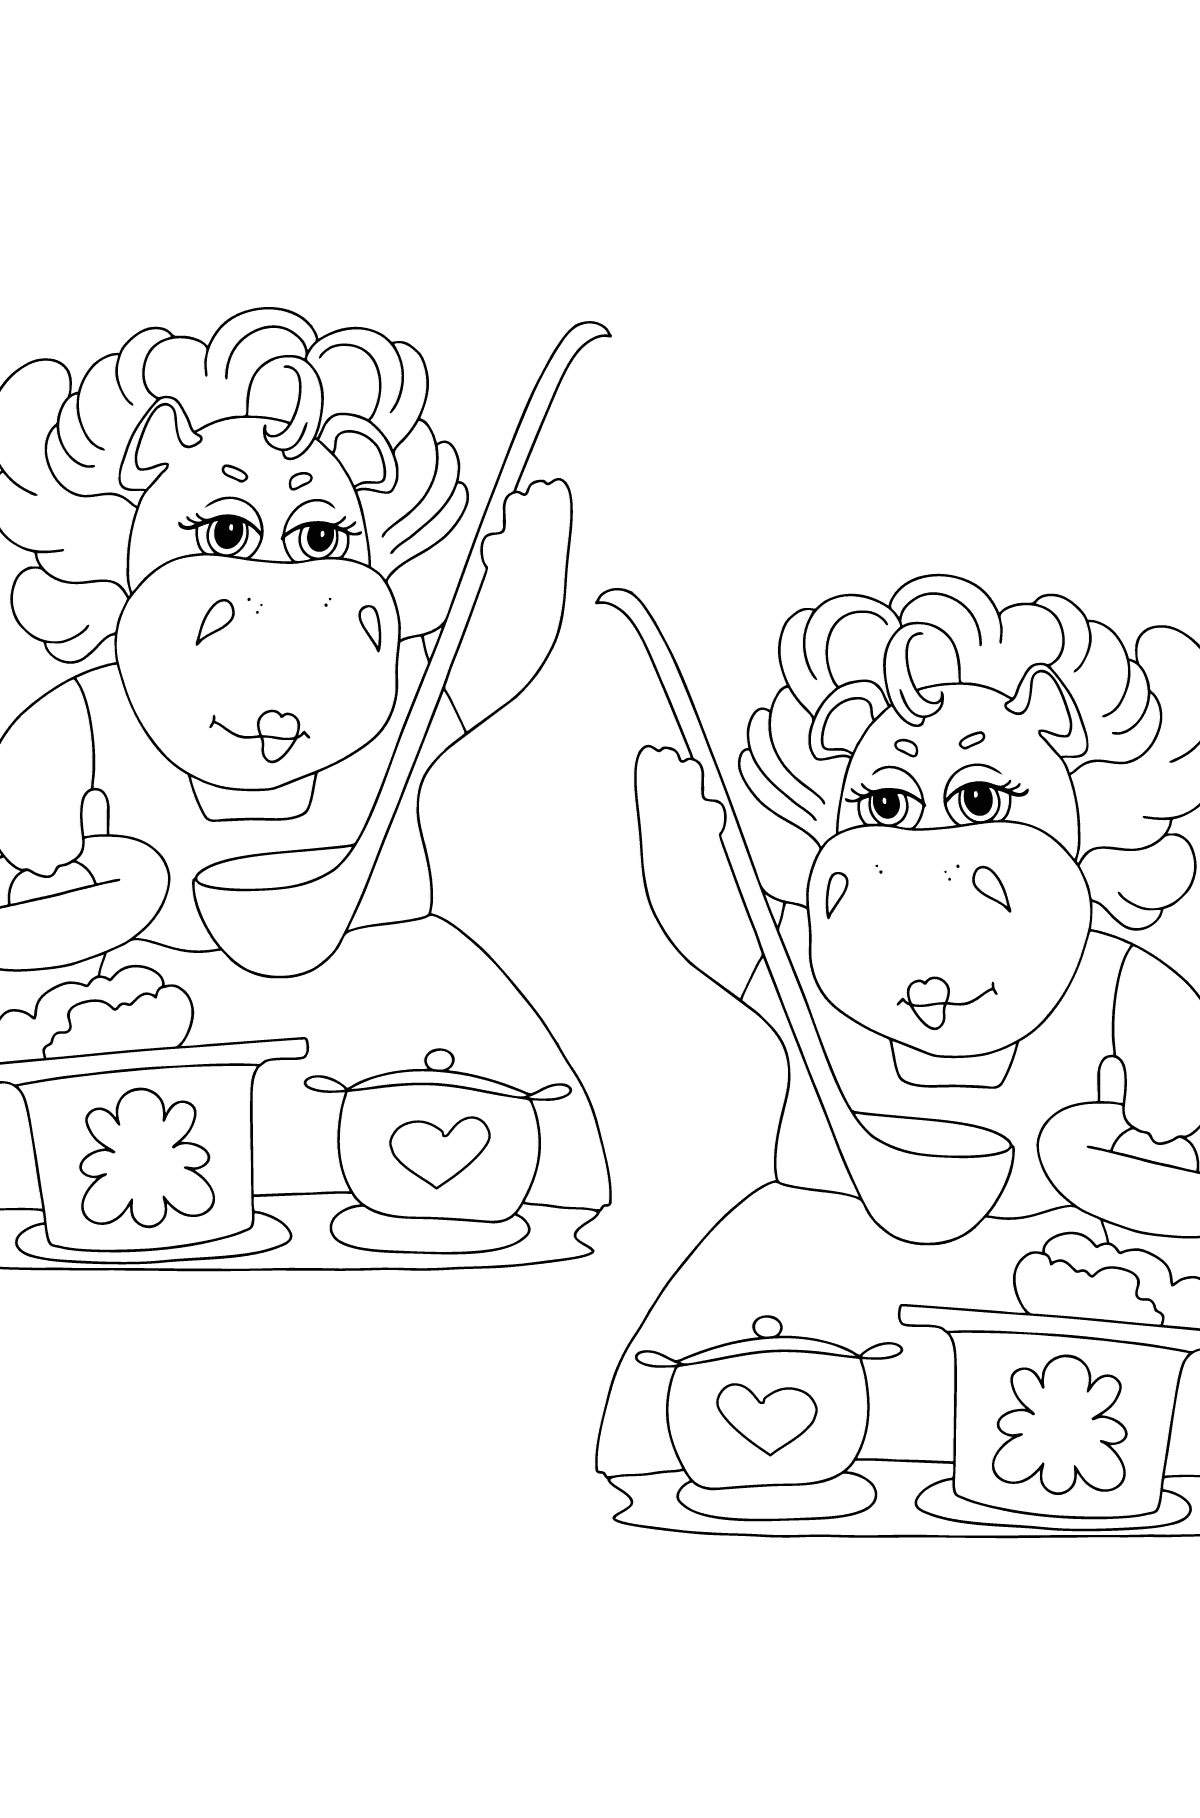 Magic Hippos (hard) coloring page - Coloring Pages for Kids